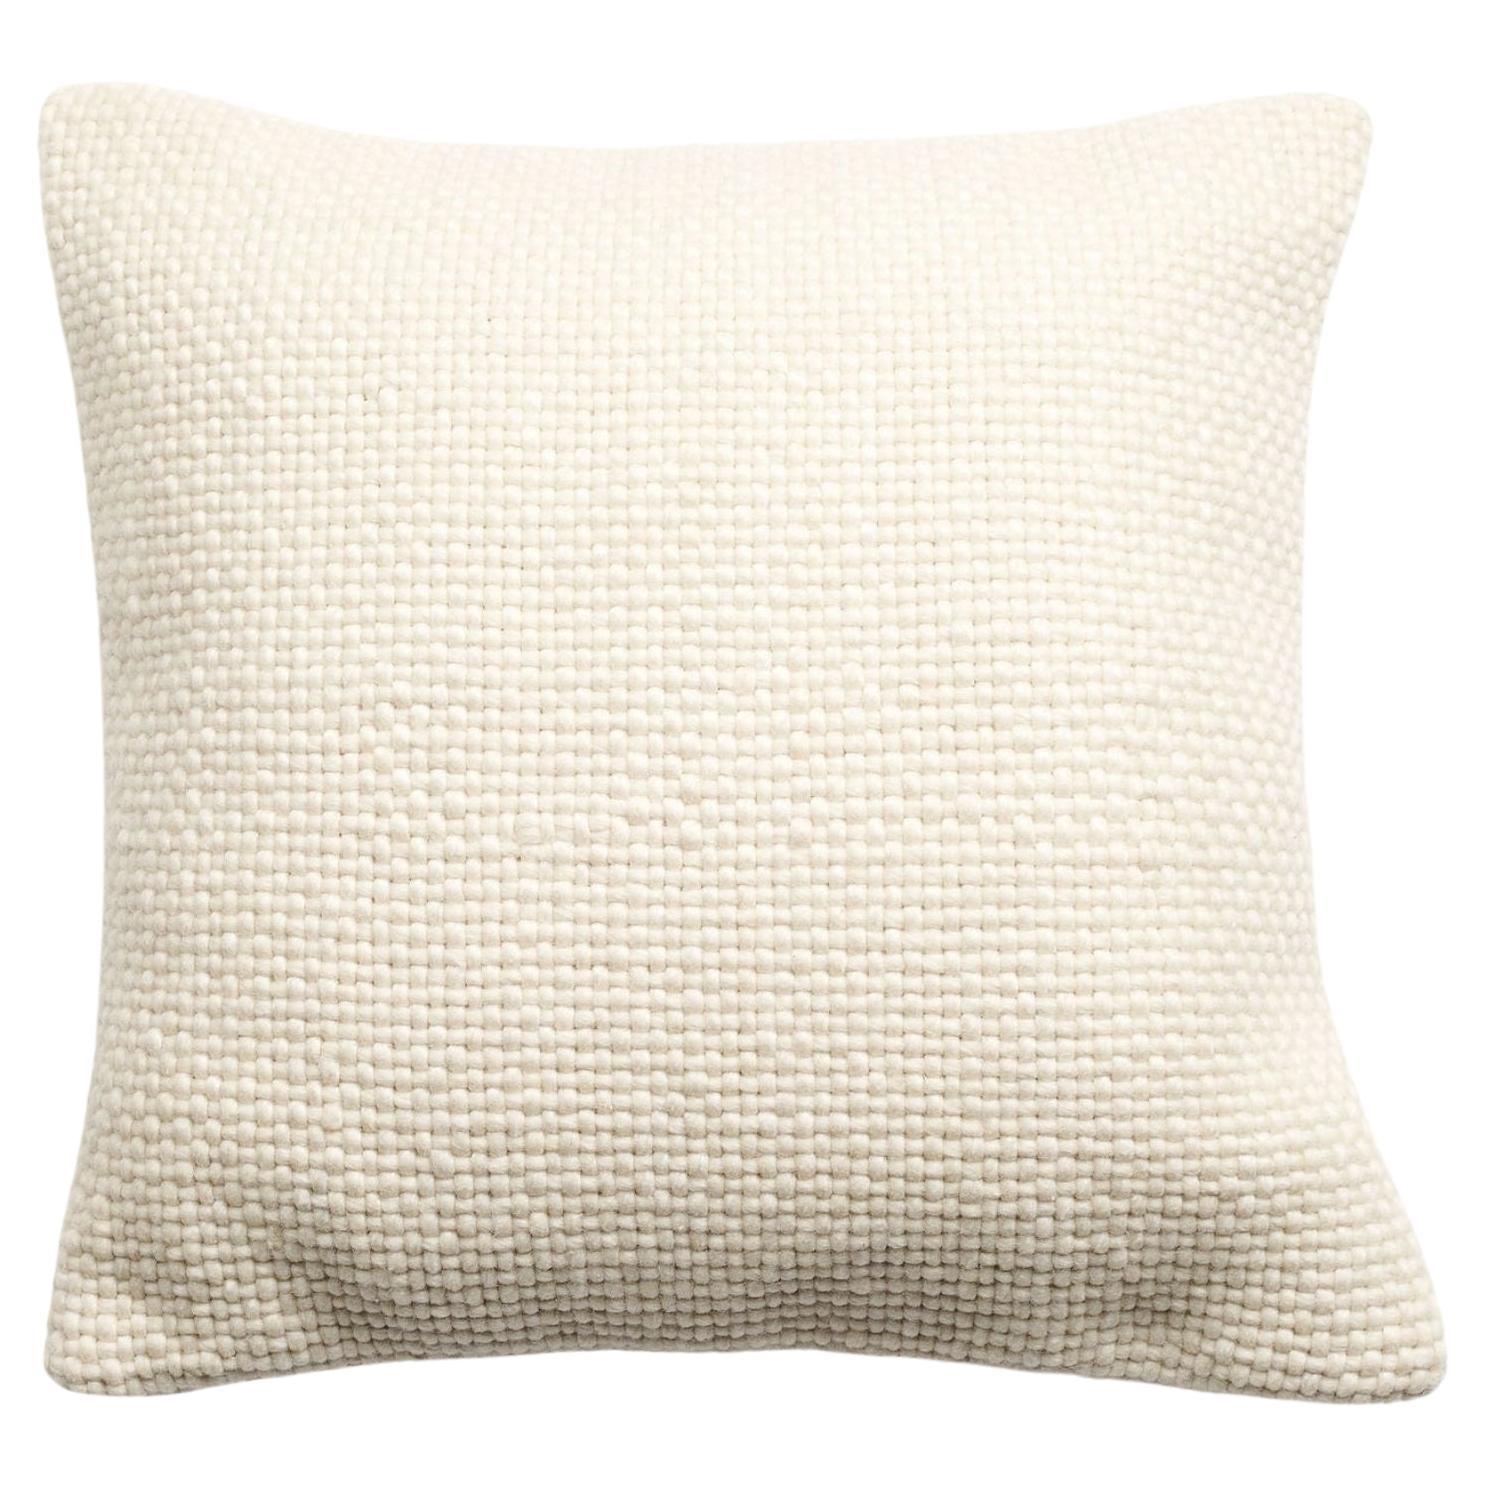 Cloud White Handwoven Merino Pillow In Classic Basket Weave Pattern By Artisans  For Sale